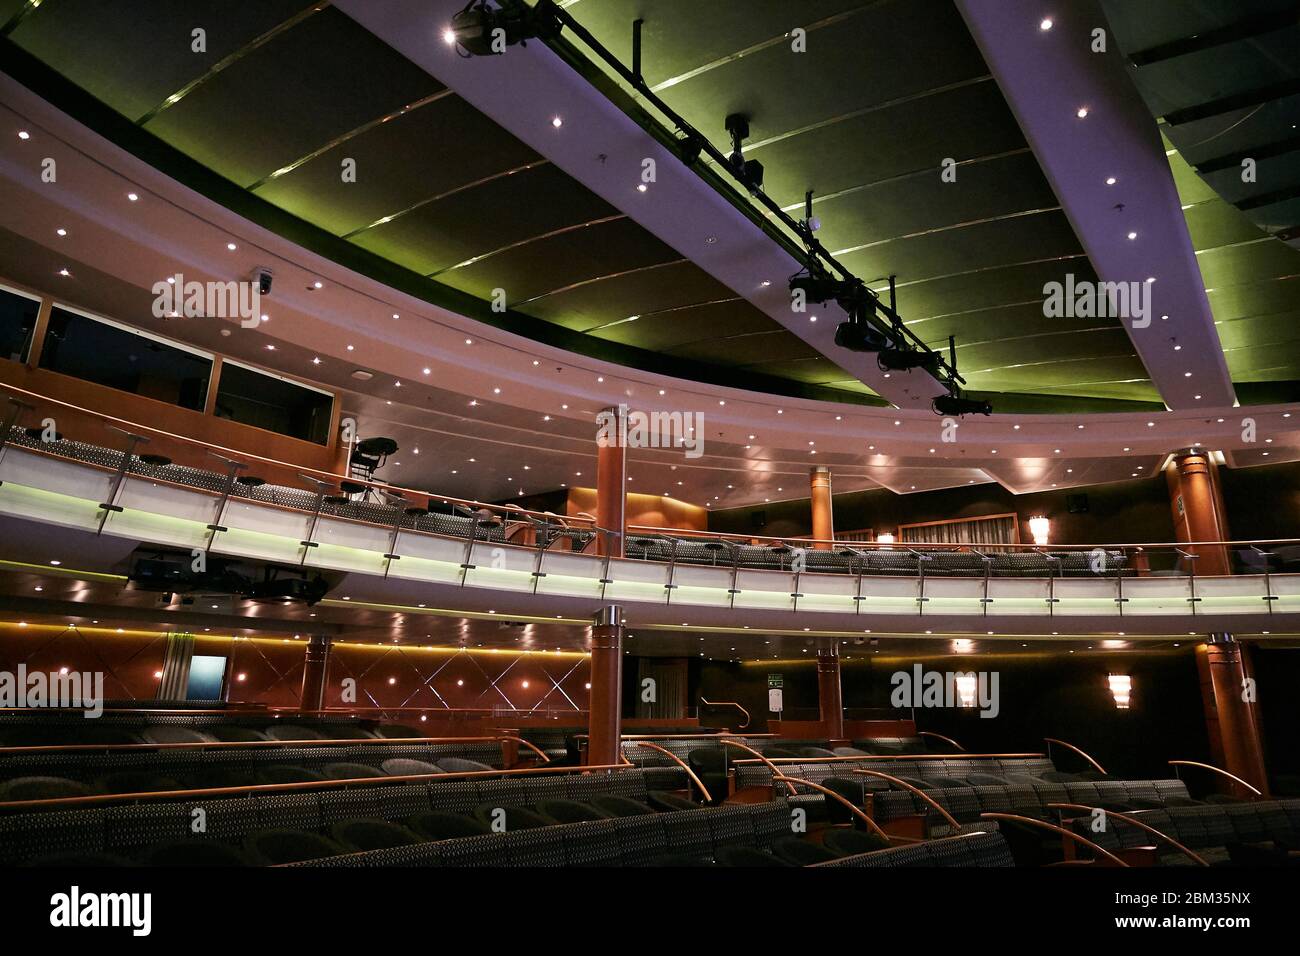 An extravagant and colorful theater stands empty on a luxury cruise ship Stock Photo